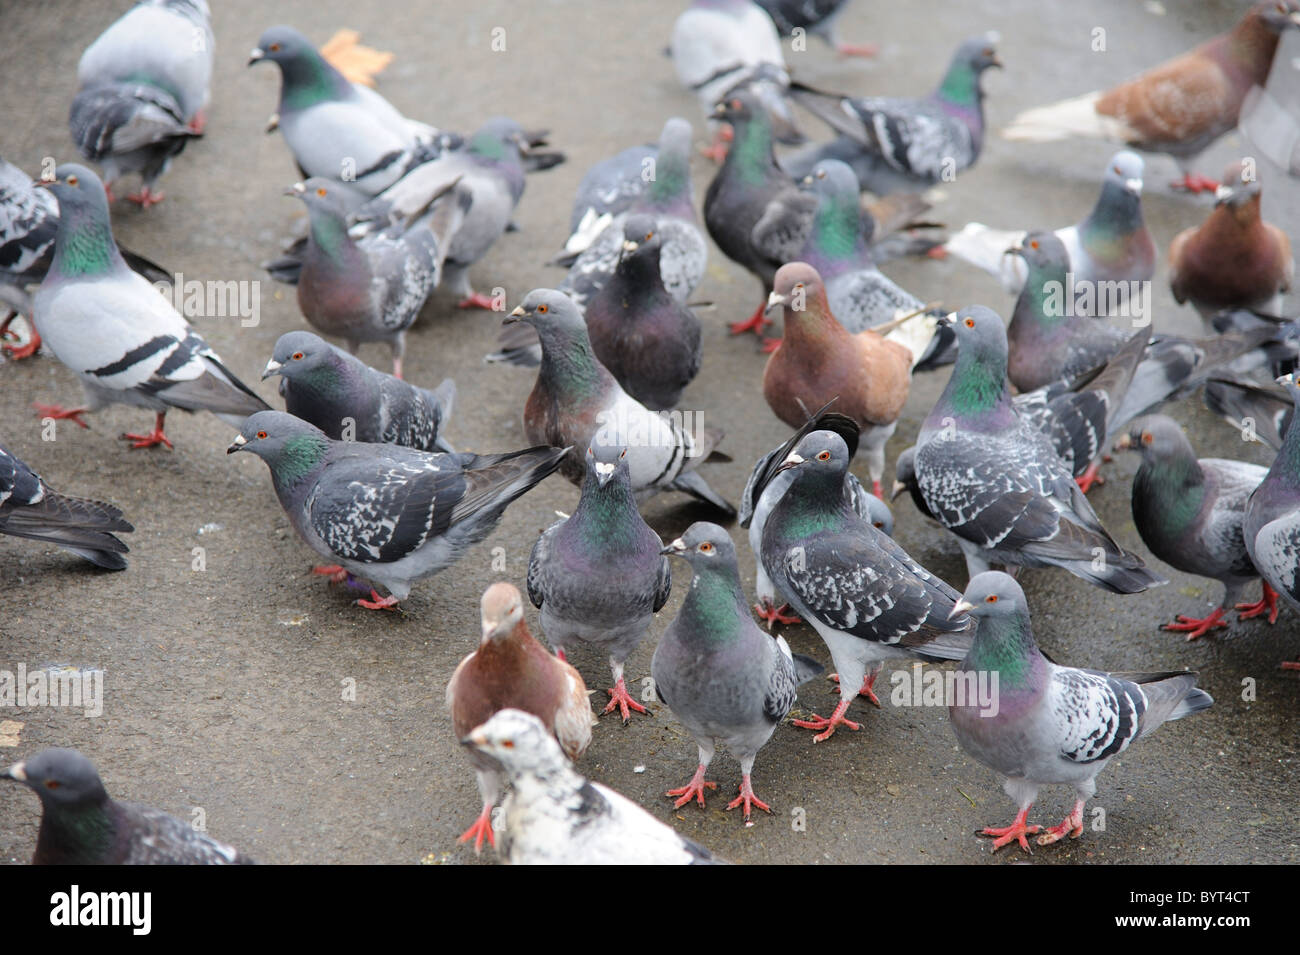 A crowd of pigeons Stock Photo